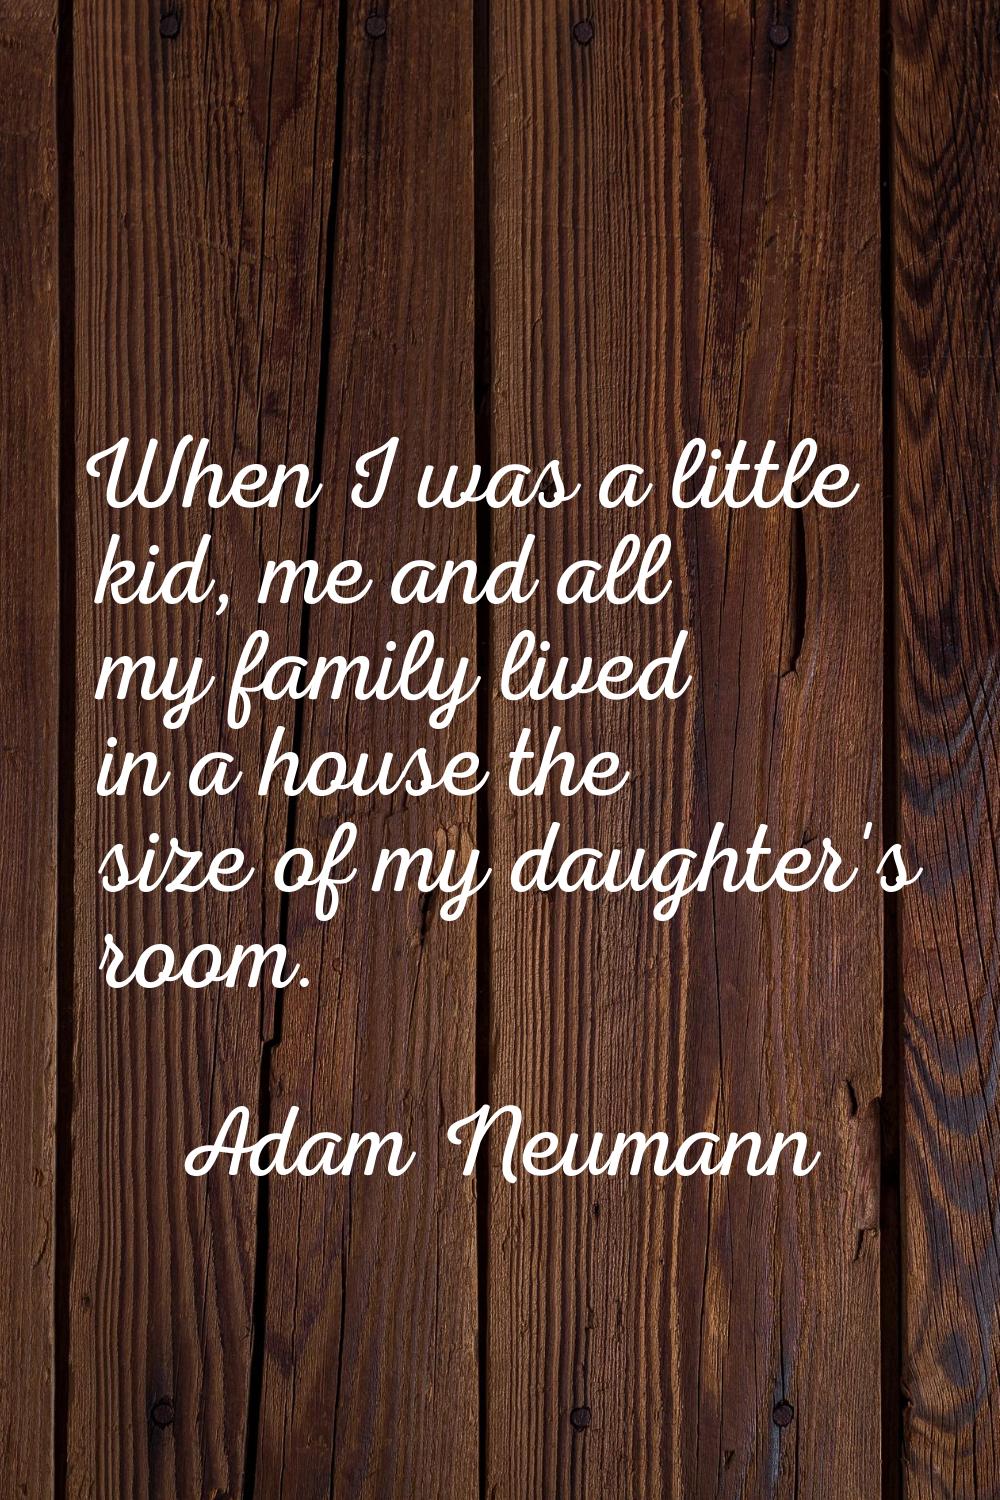 When I was a little kid, me and all my family lived in a house the size of my daughter's room.